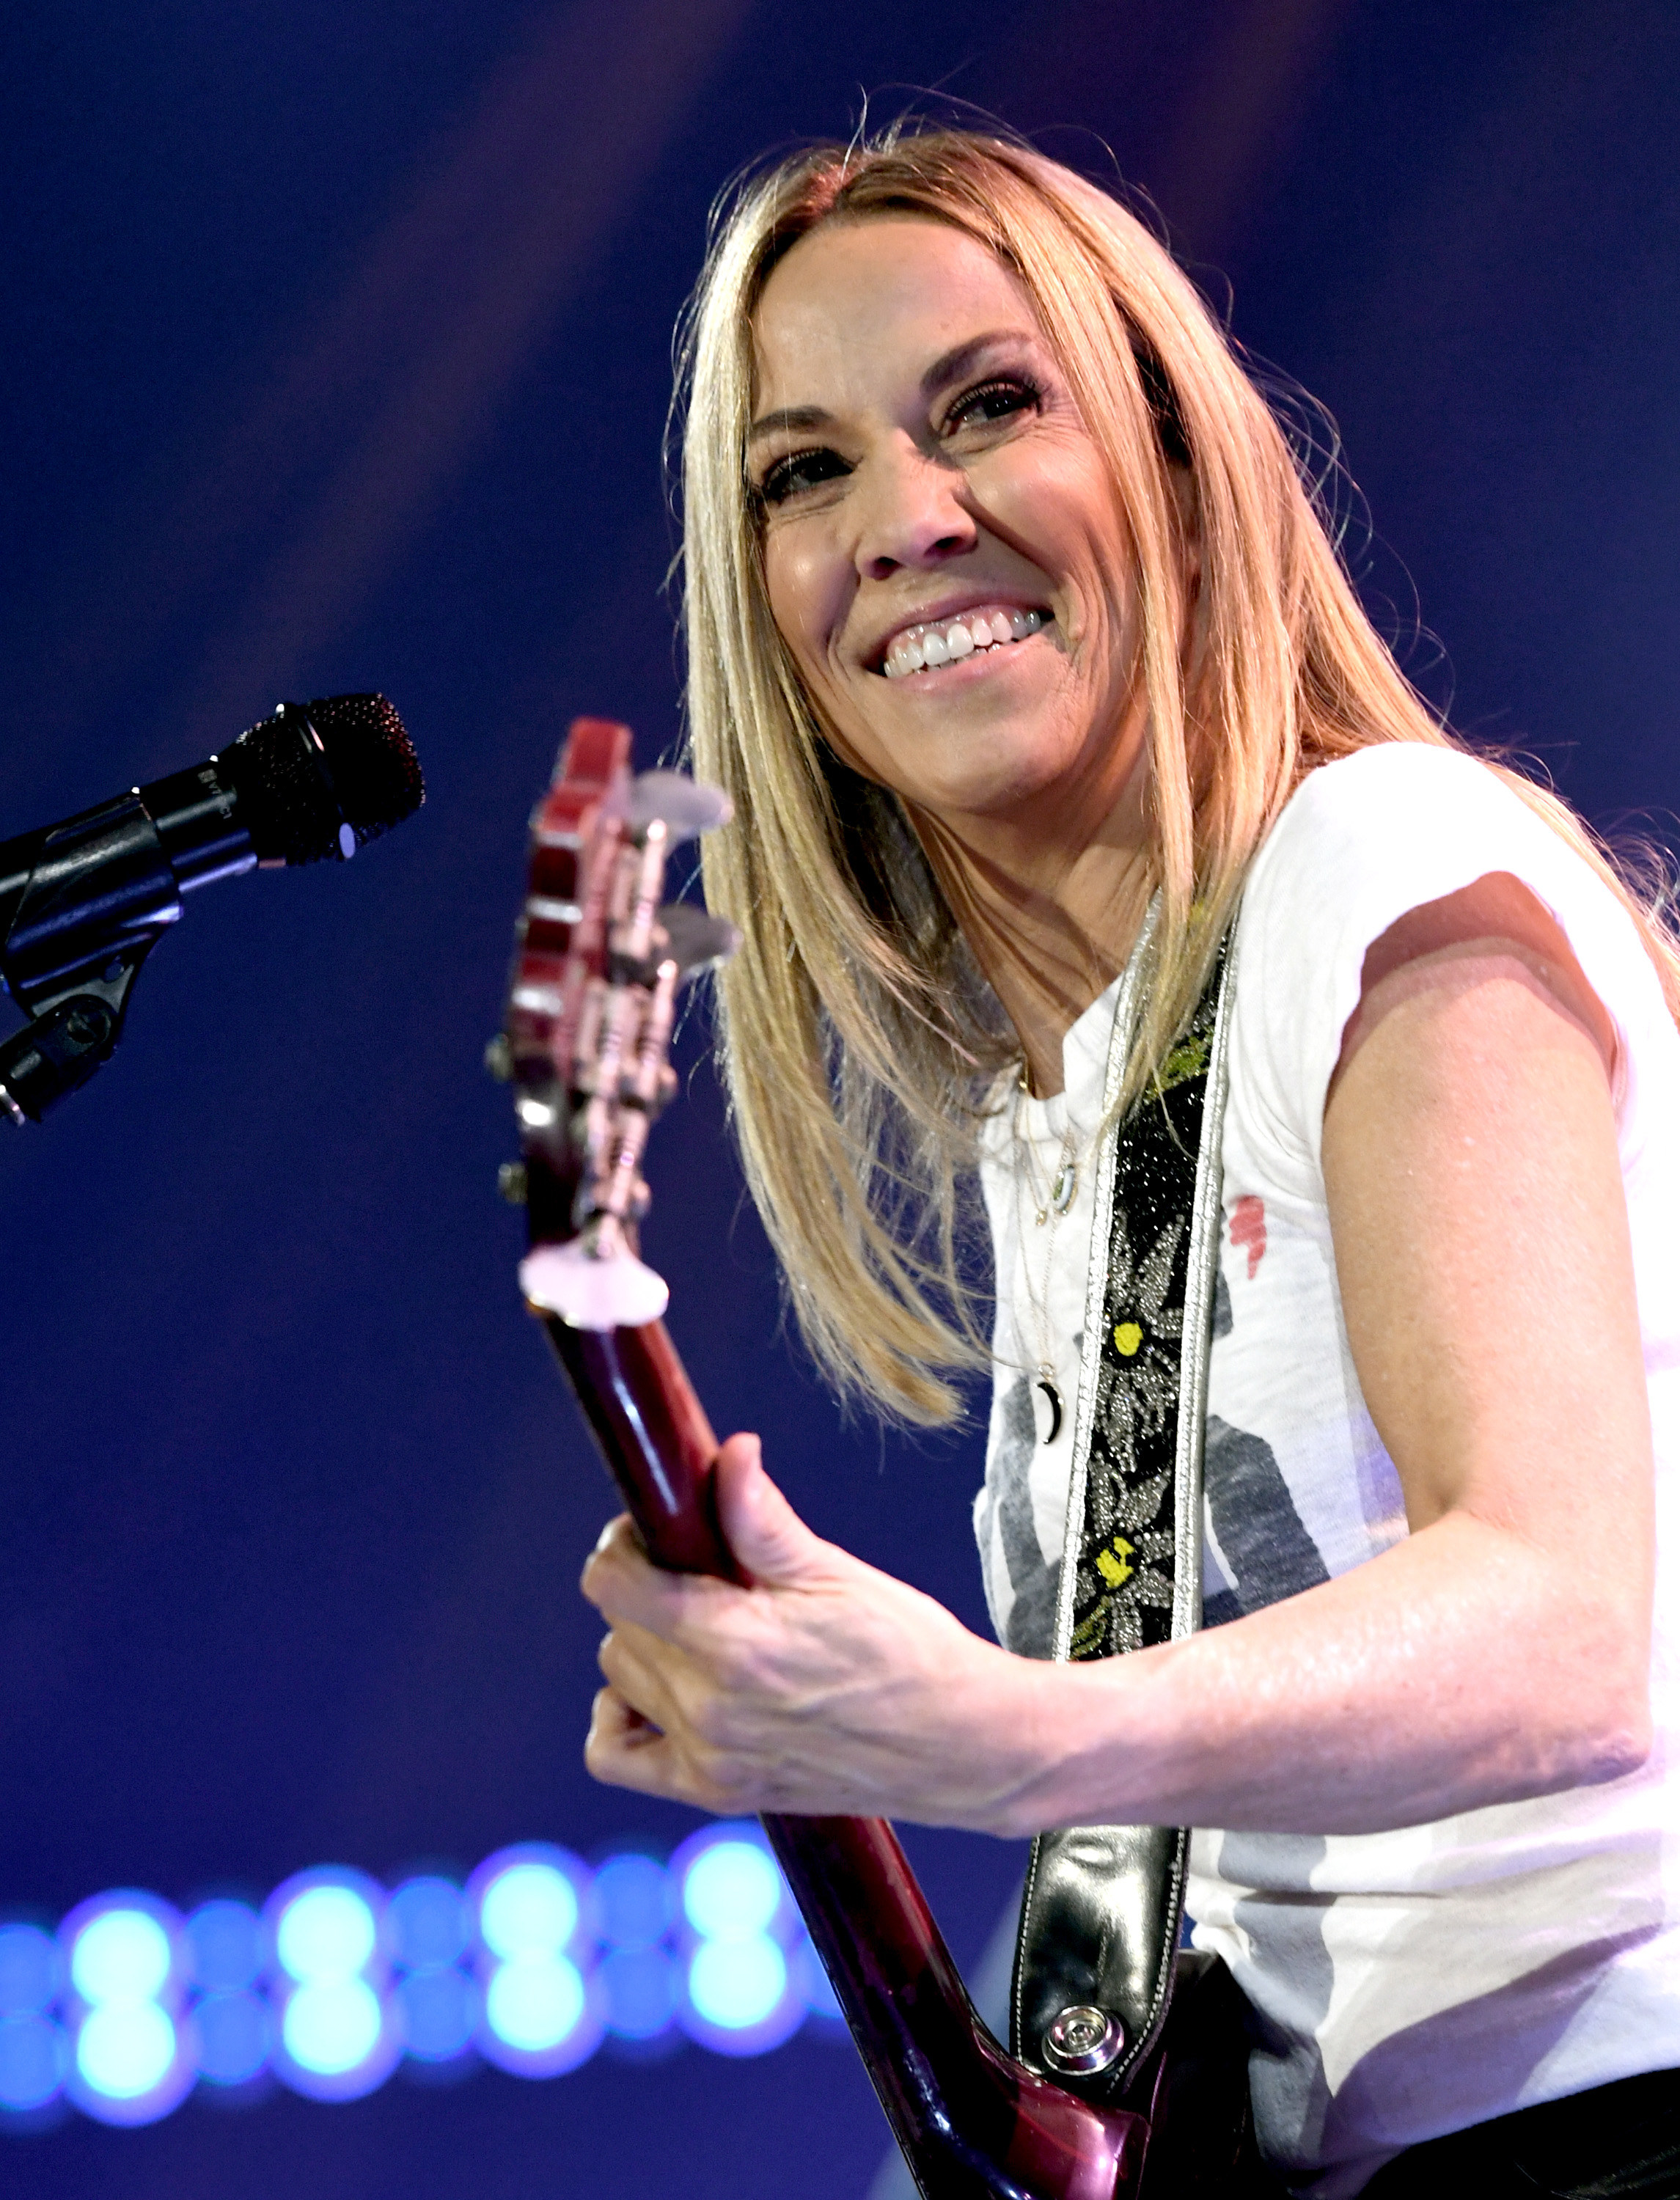 Sheryl Crow wearing a white t-shirt, holding a guitar and smiling.